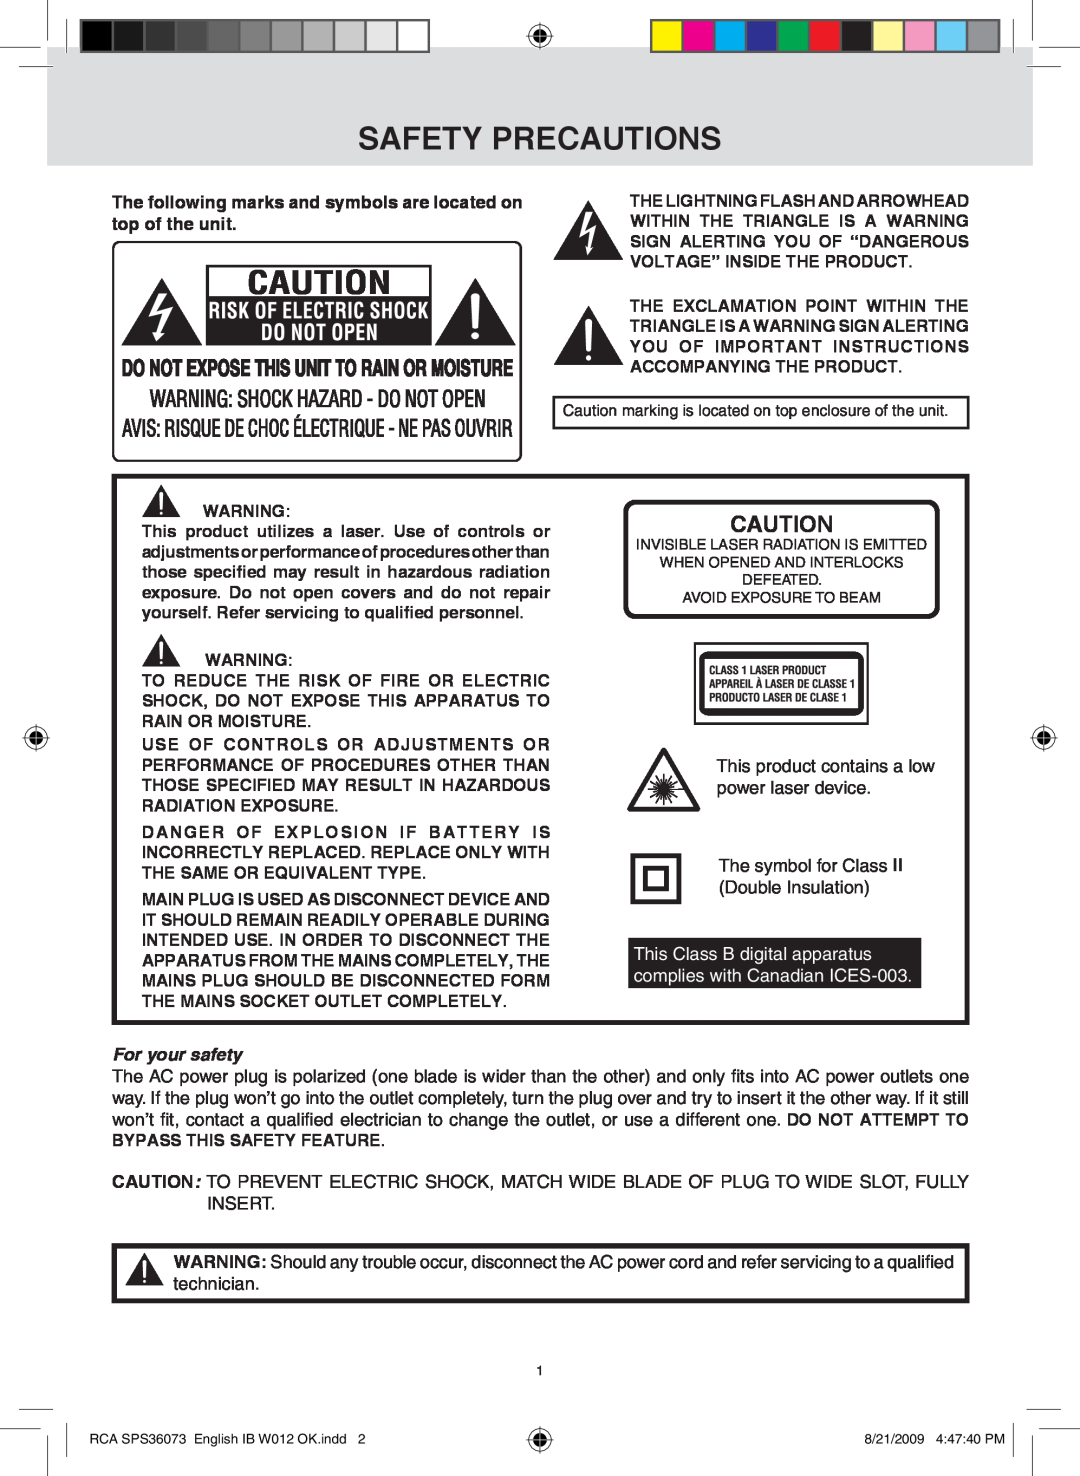 RCA SPS36073 Safety Precautions, For your safety, The following marks and symbols are located on top of the unit 